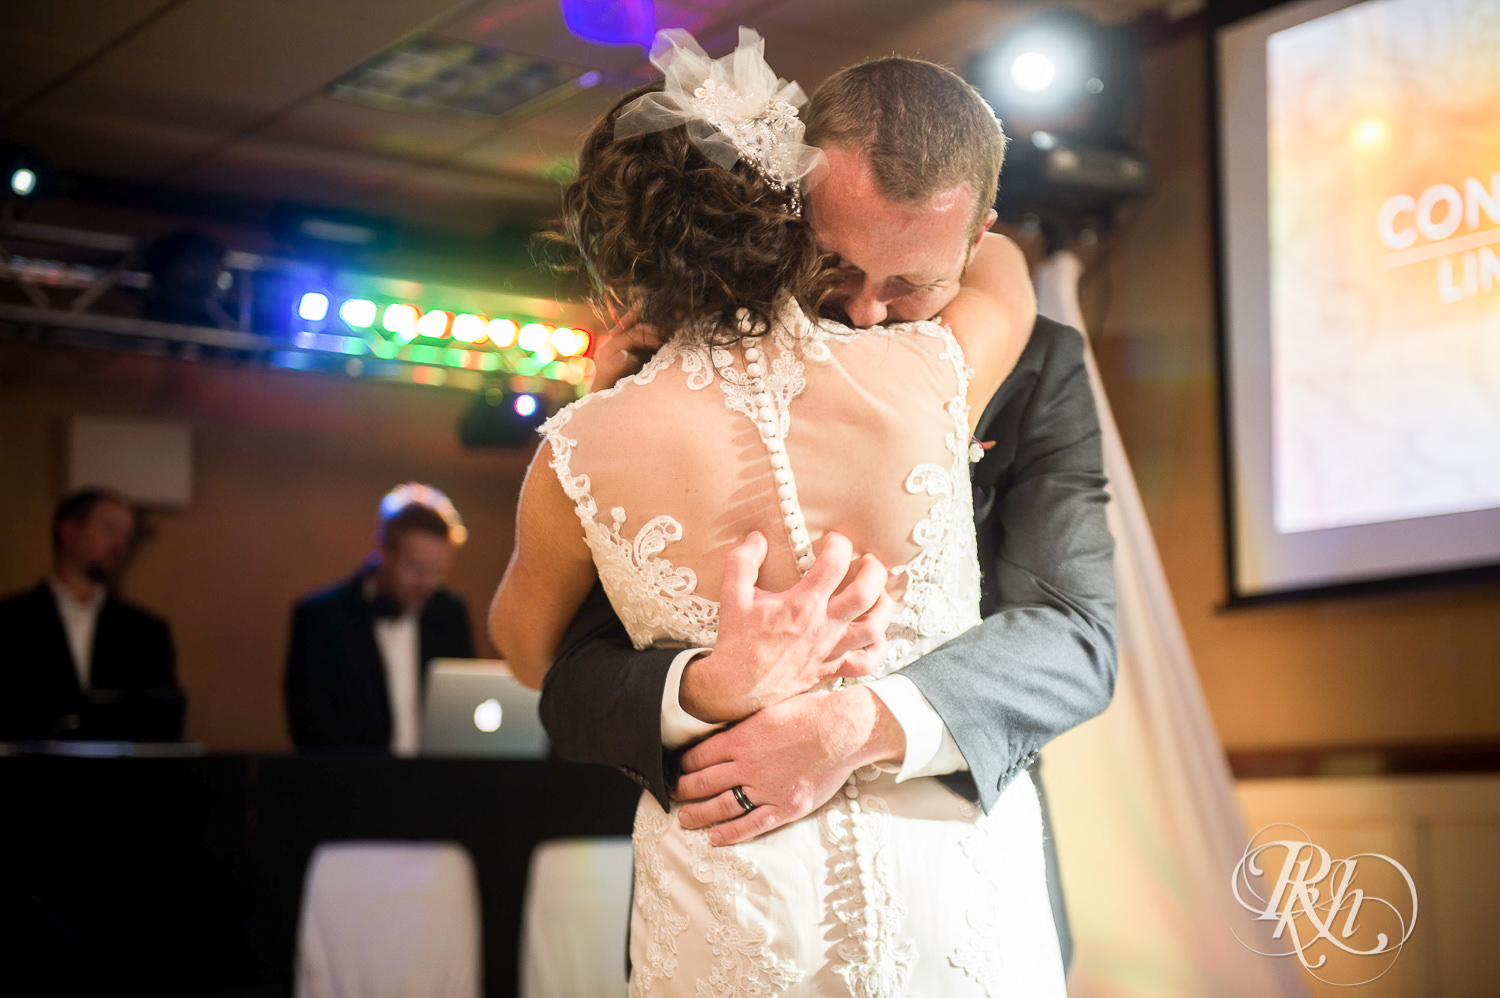 Bride and groom dance during wedding reception at White Bear Country Inn in White Bear Lake, Minnesota.